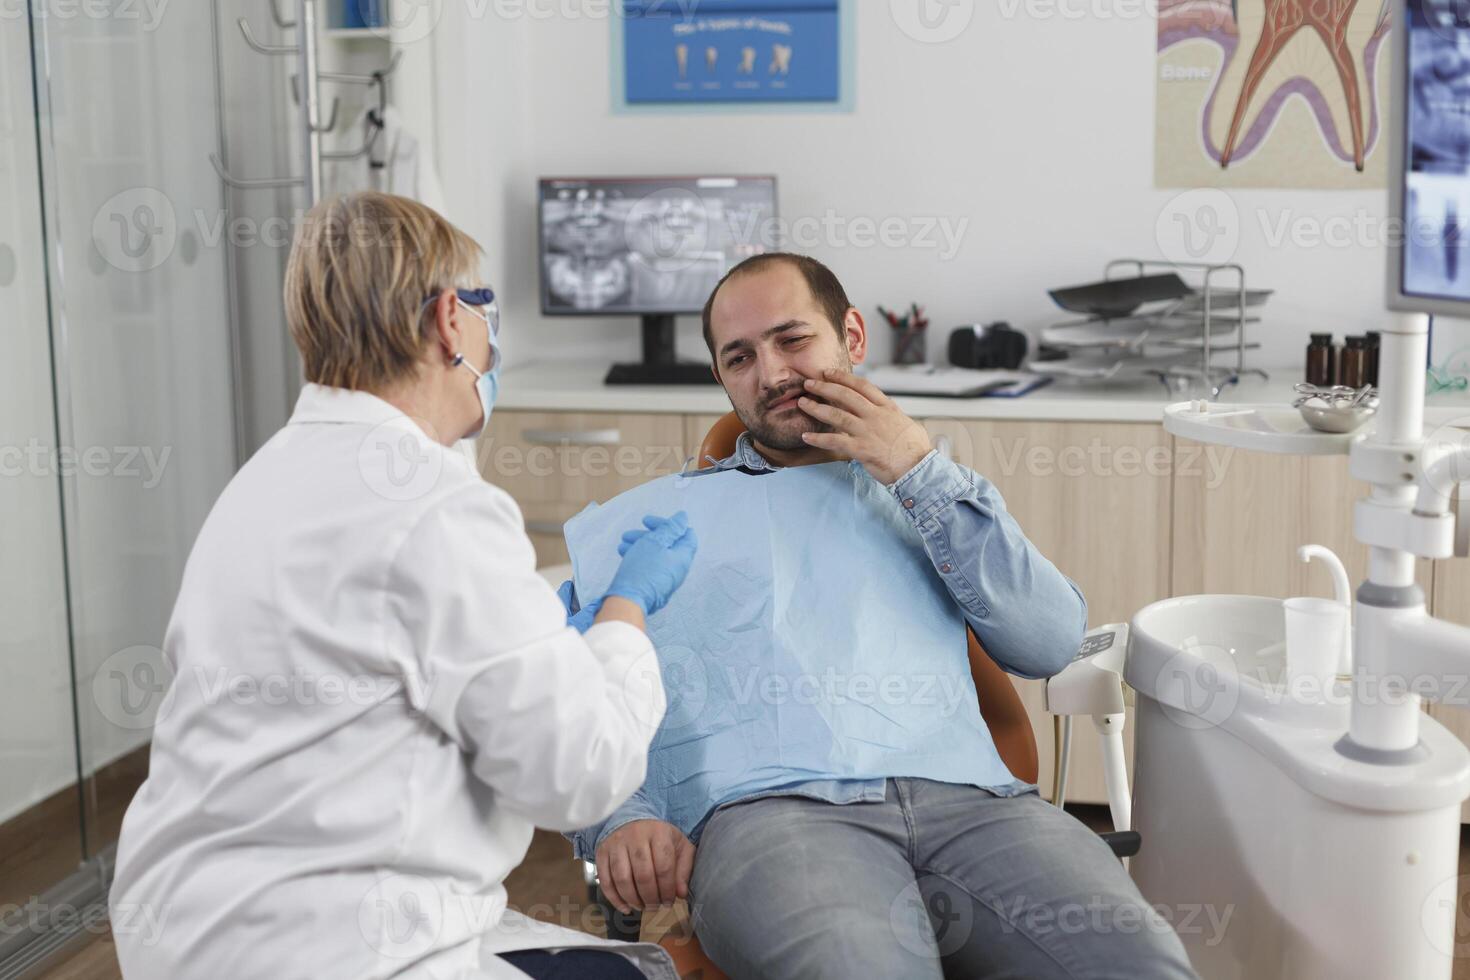 Dentist doctor explaining oral hygiene to patient with toothache discussing healthcare treatment during stomatological consultation in dental office room. Concept of medicine service photo